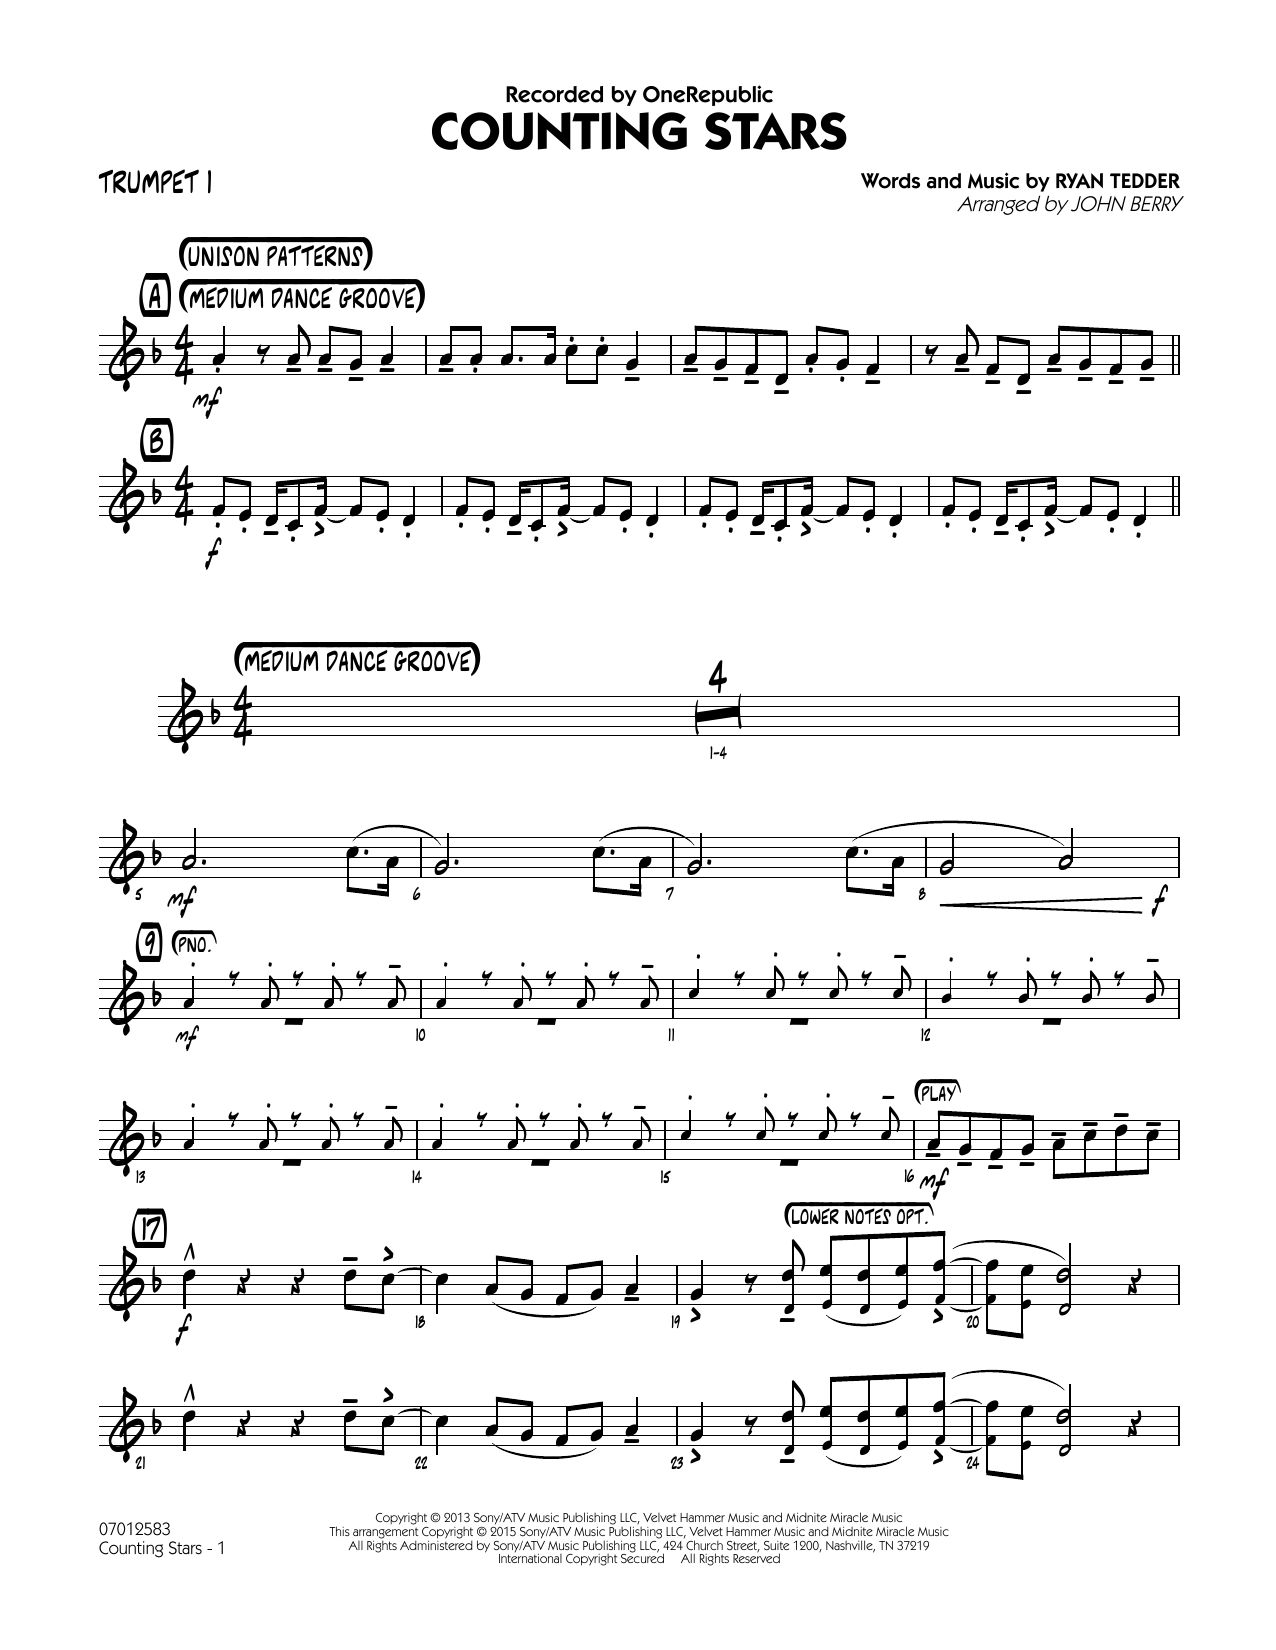 John Berry Counting Stars - Trumpet 1 sheet music notes and chords. Download Printable PDF.